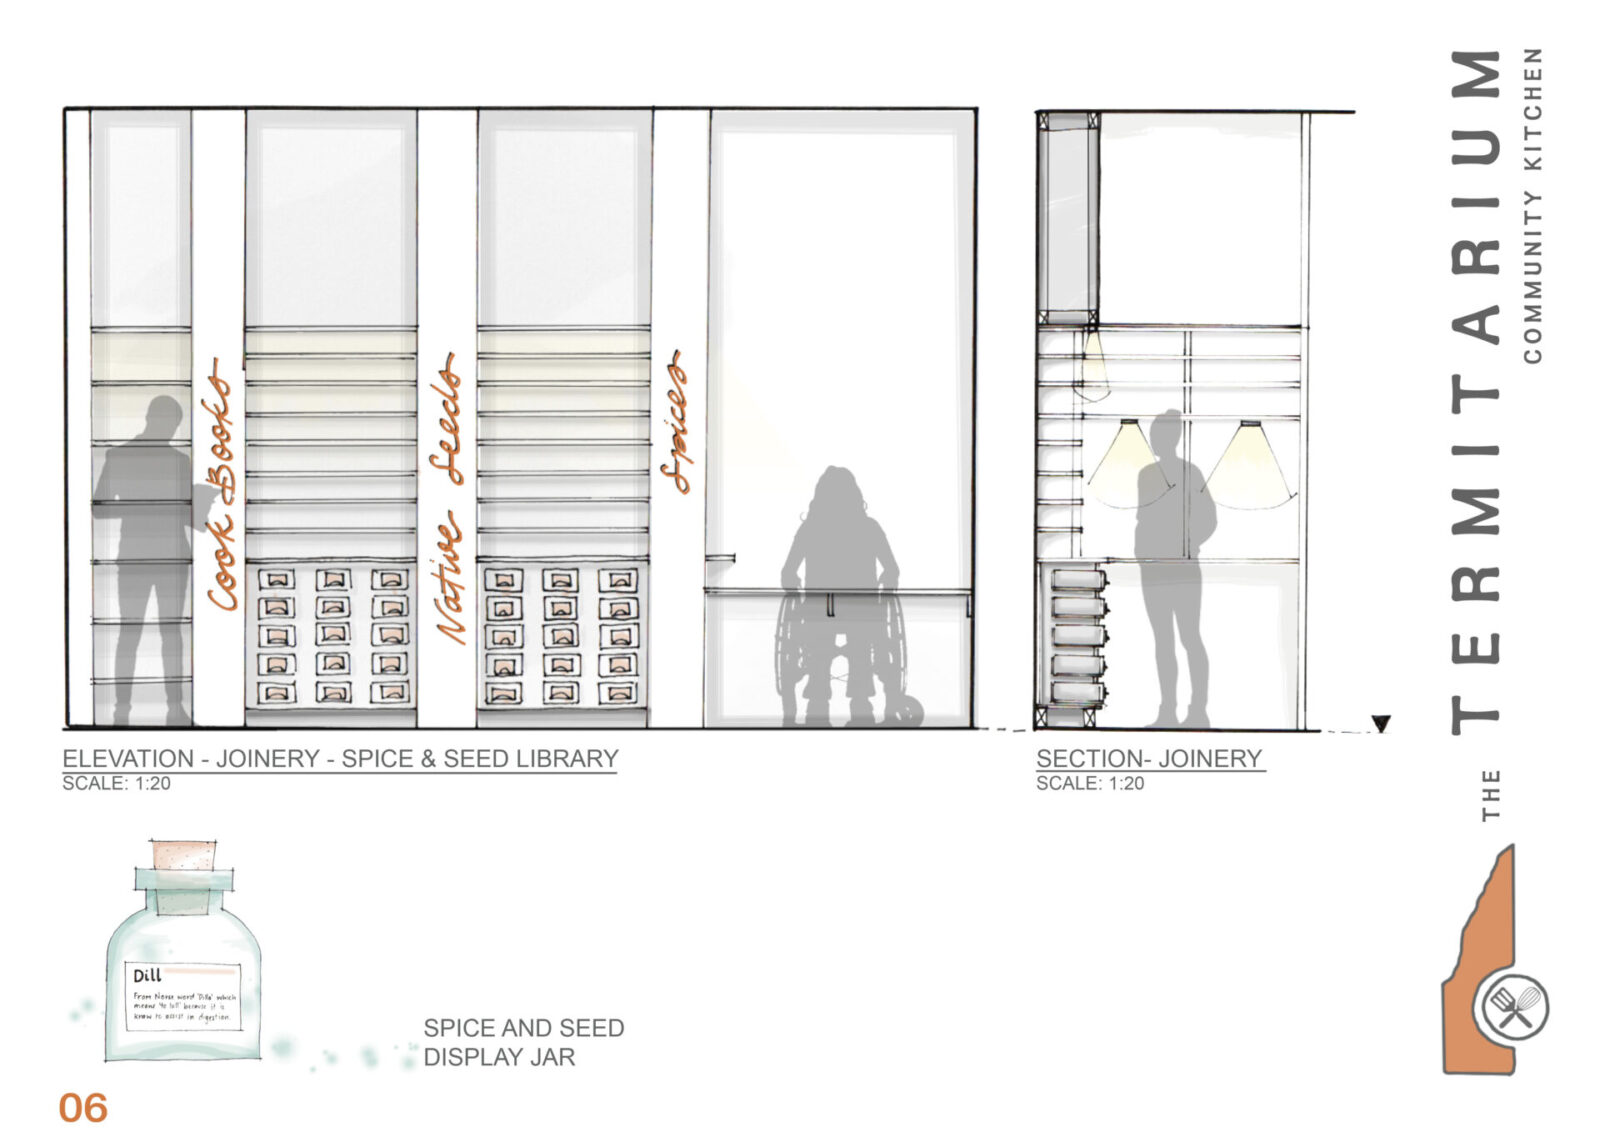 The joinery elevation shows the shelving above and apothecary inspired storage system below.  Accessible table height seating is found on one side so that more in depth study can be achieved.  The section drawing shows basic construction on the apothecary inspired joinery with inbuilt down lighting. From Macro to micro, the seed and spice jars have also been designed and are shown to give a entire picture of the designed space.